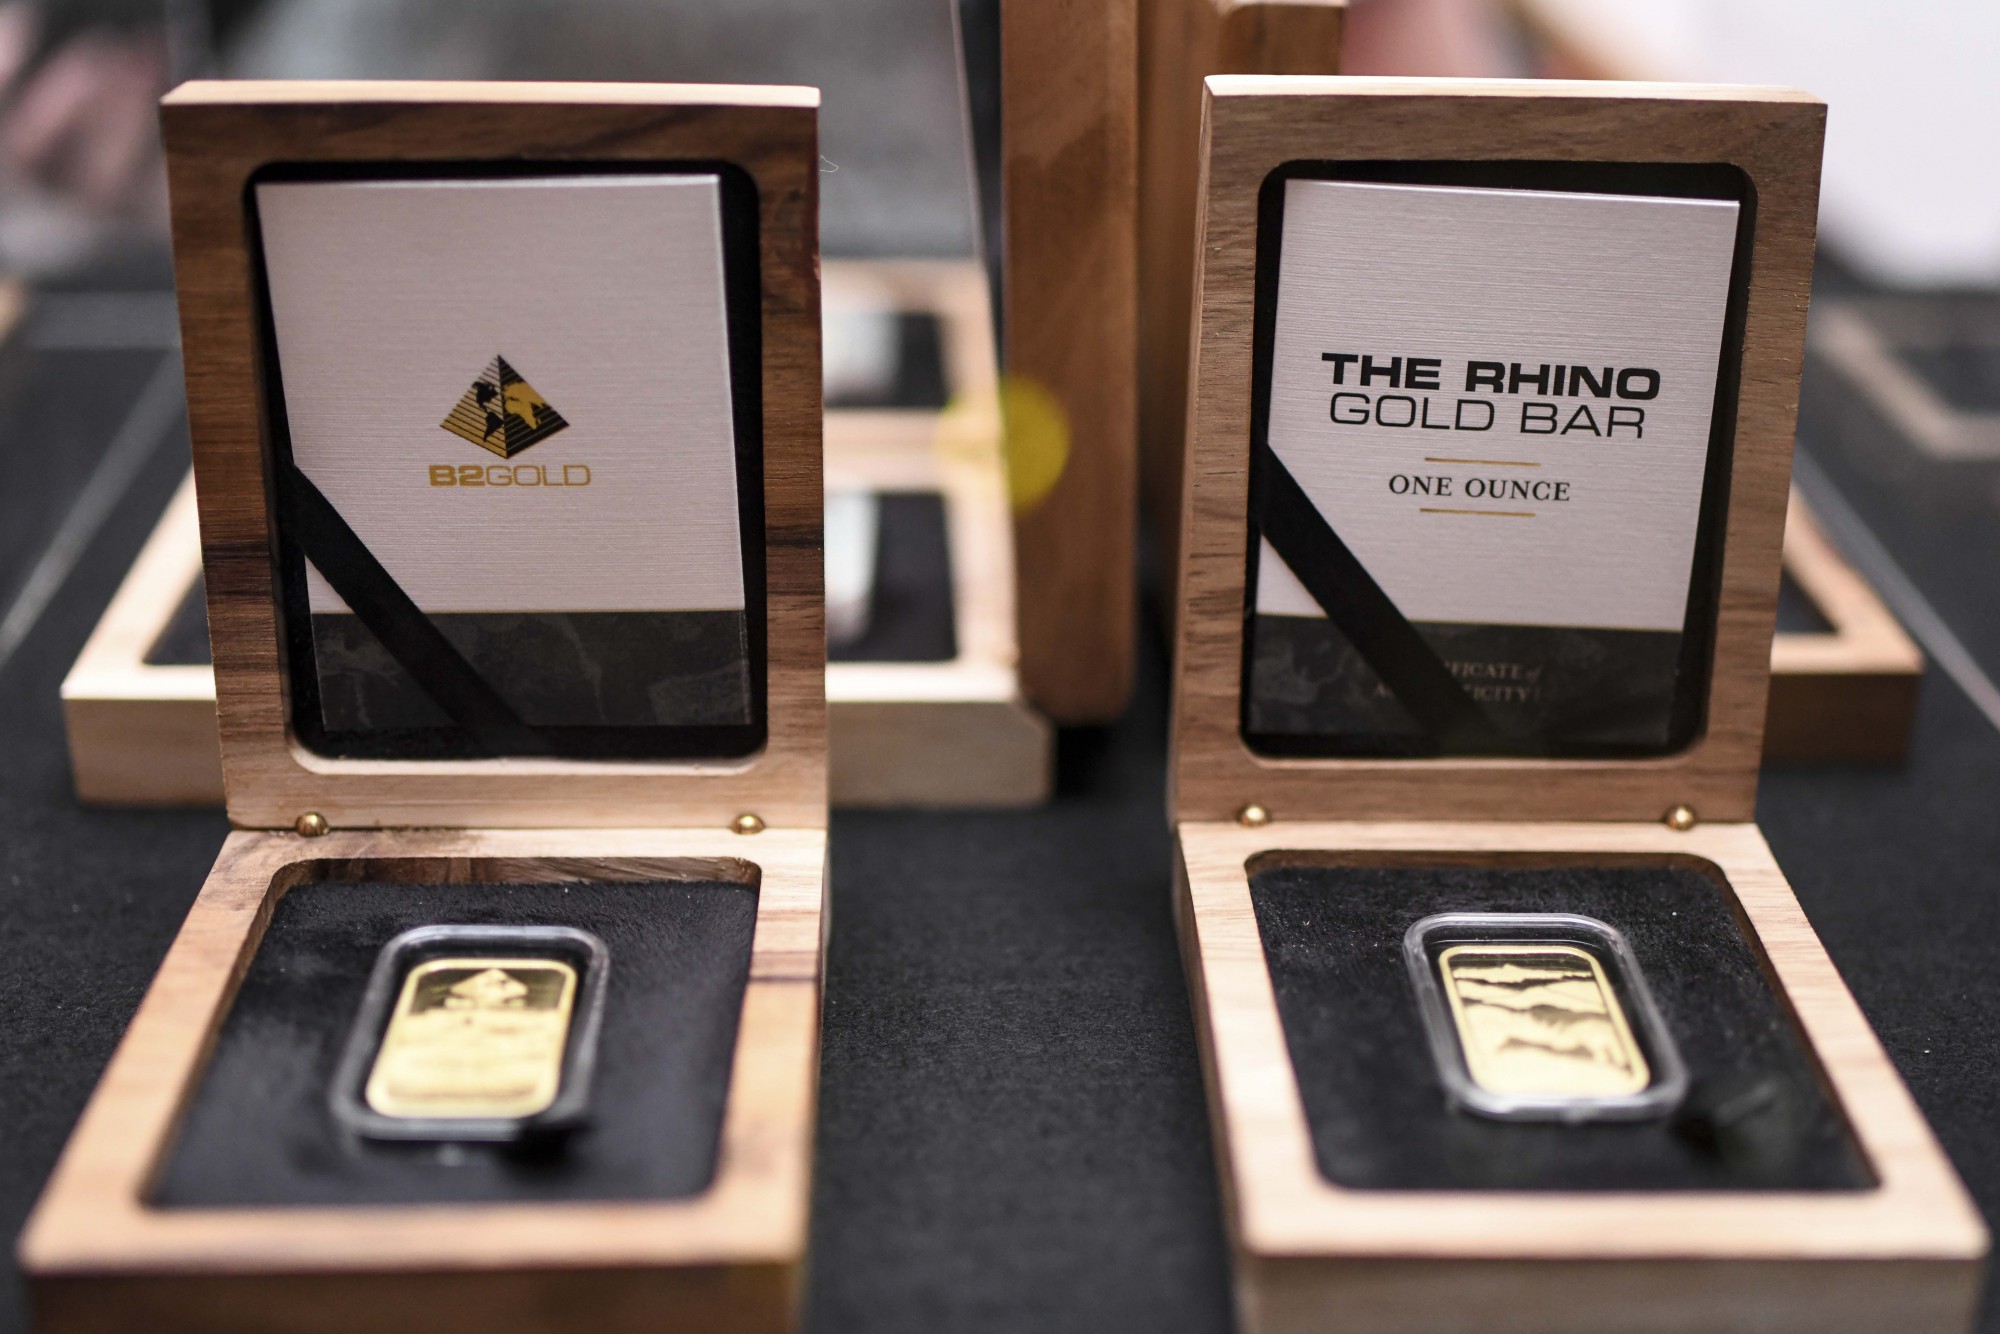 B2Gold Corp. on X: Our Namibian Rhino Gold Bar initiative is a